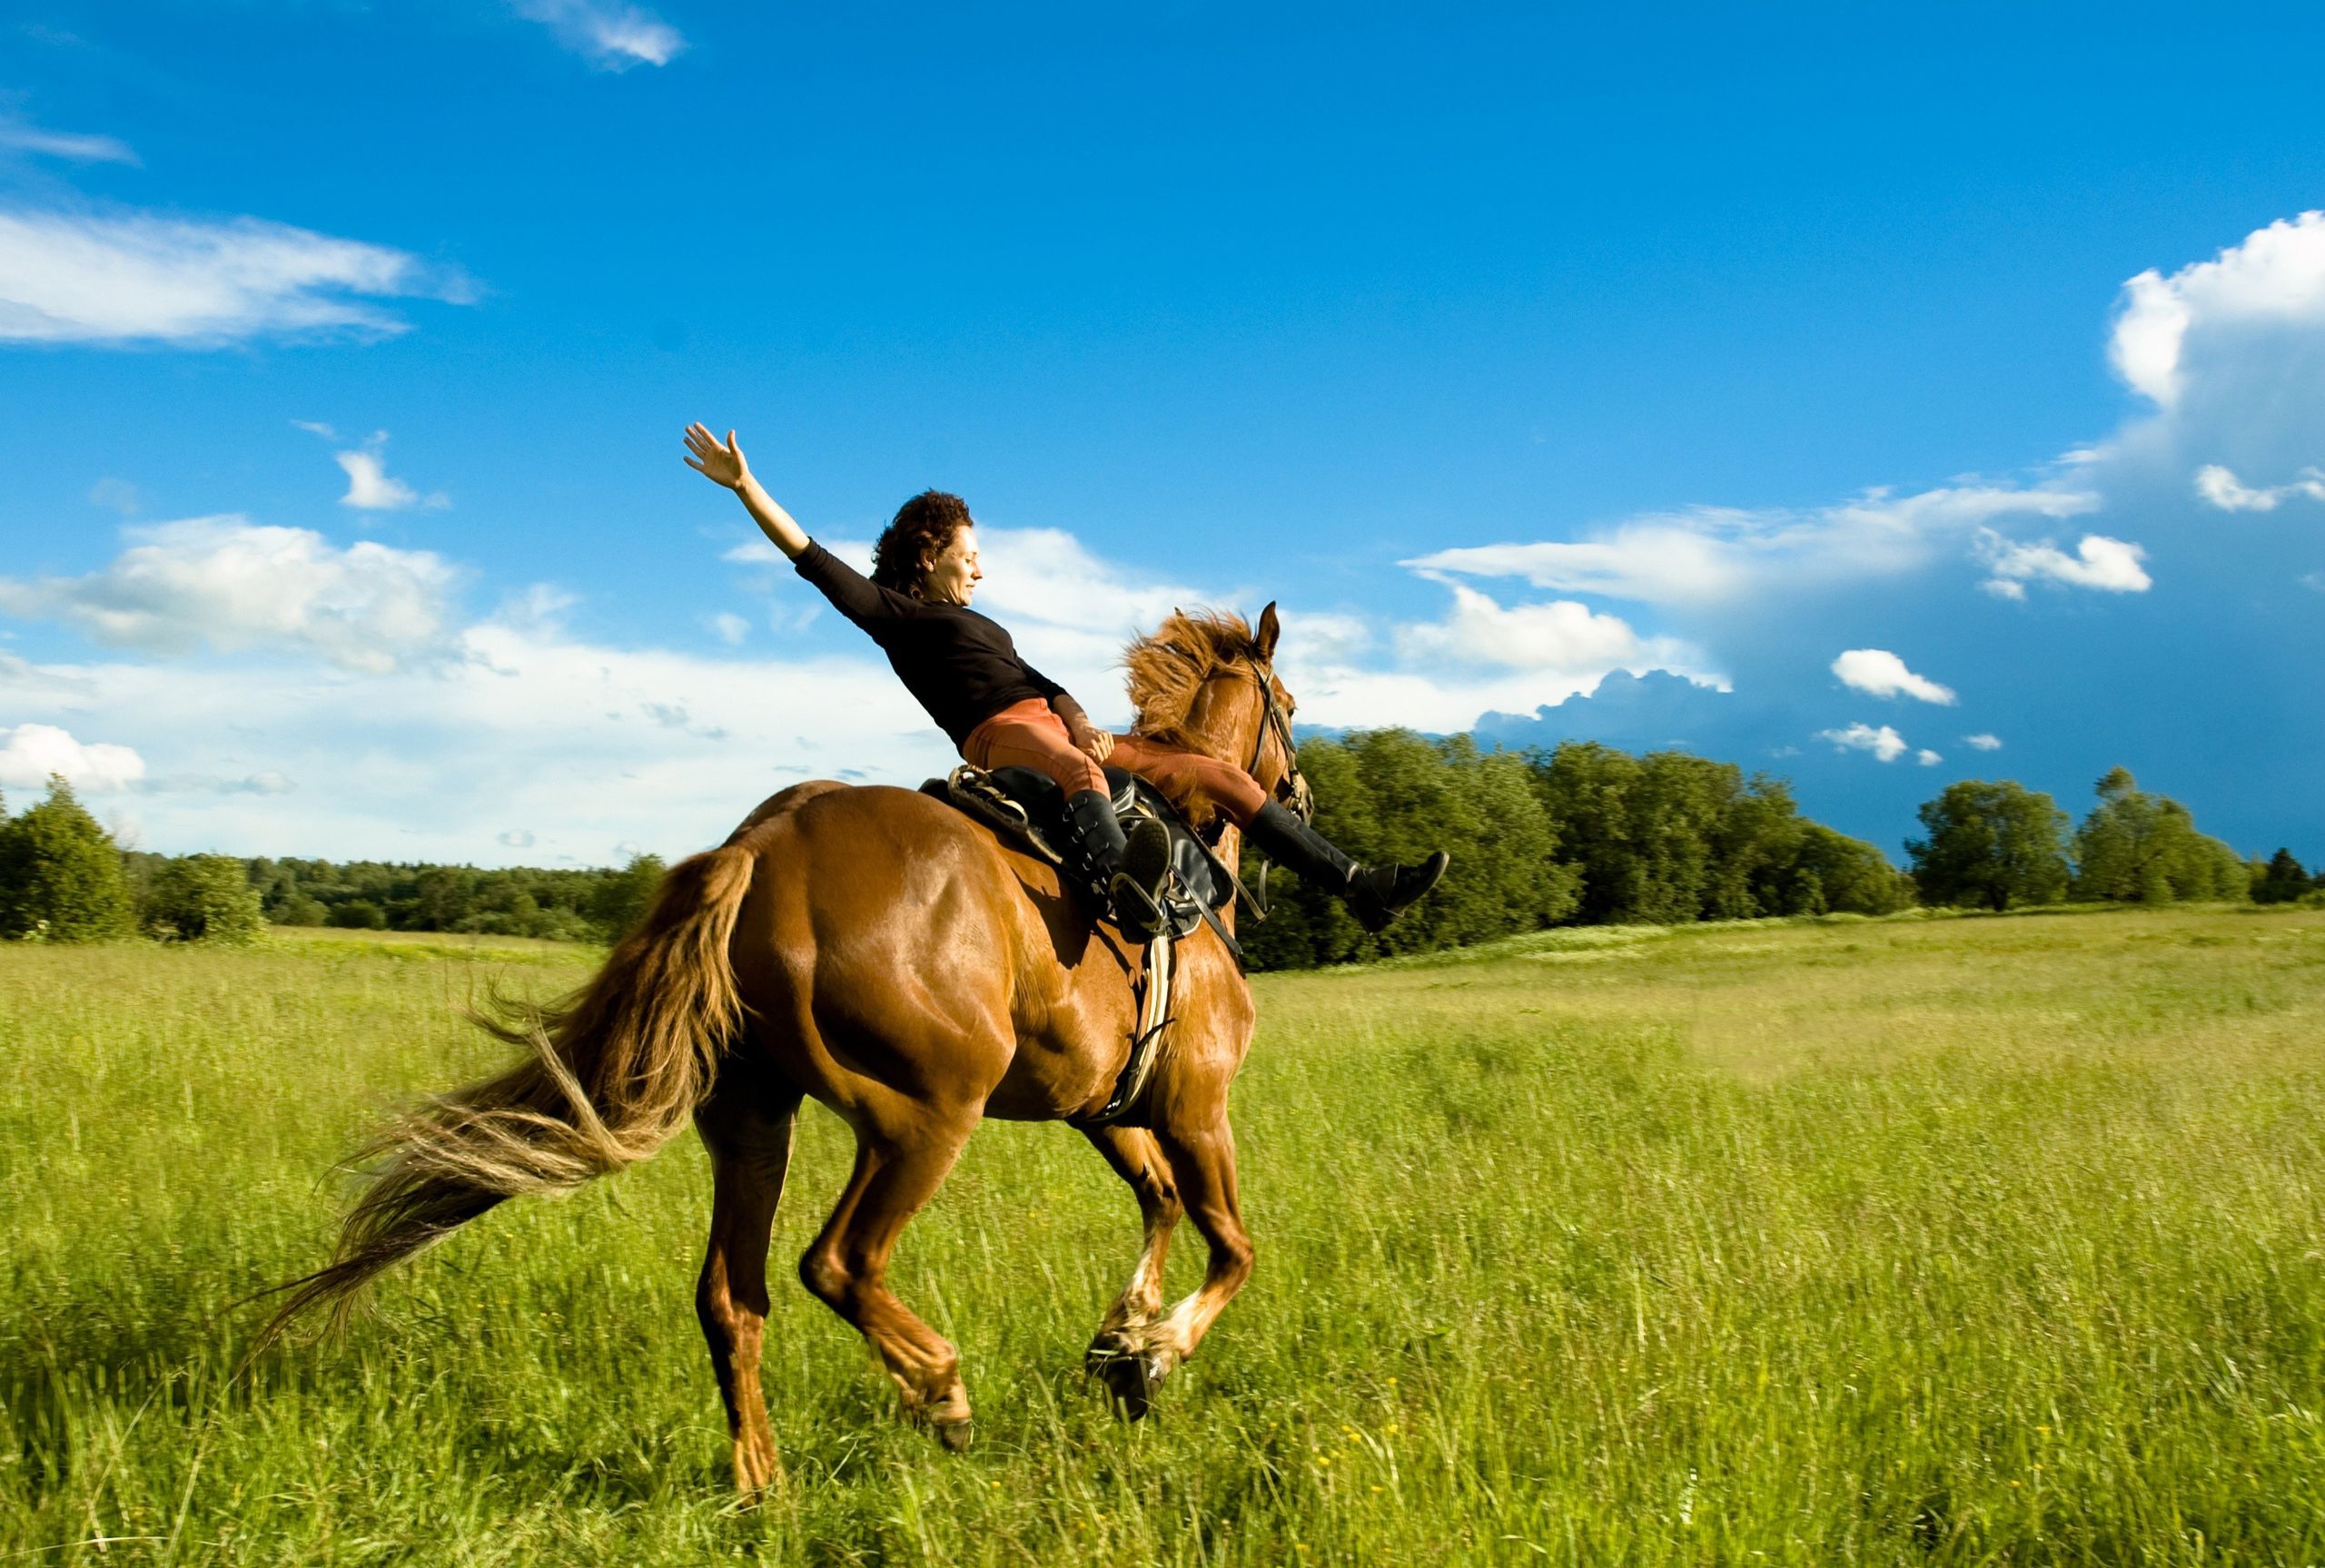 Top Riding A Horse Wallpapers Images for Pinterest